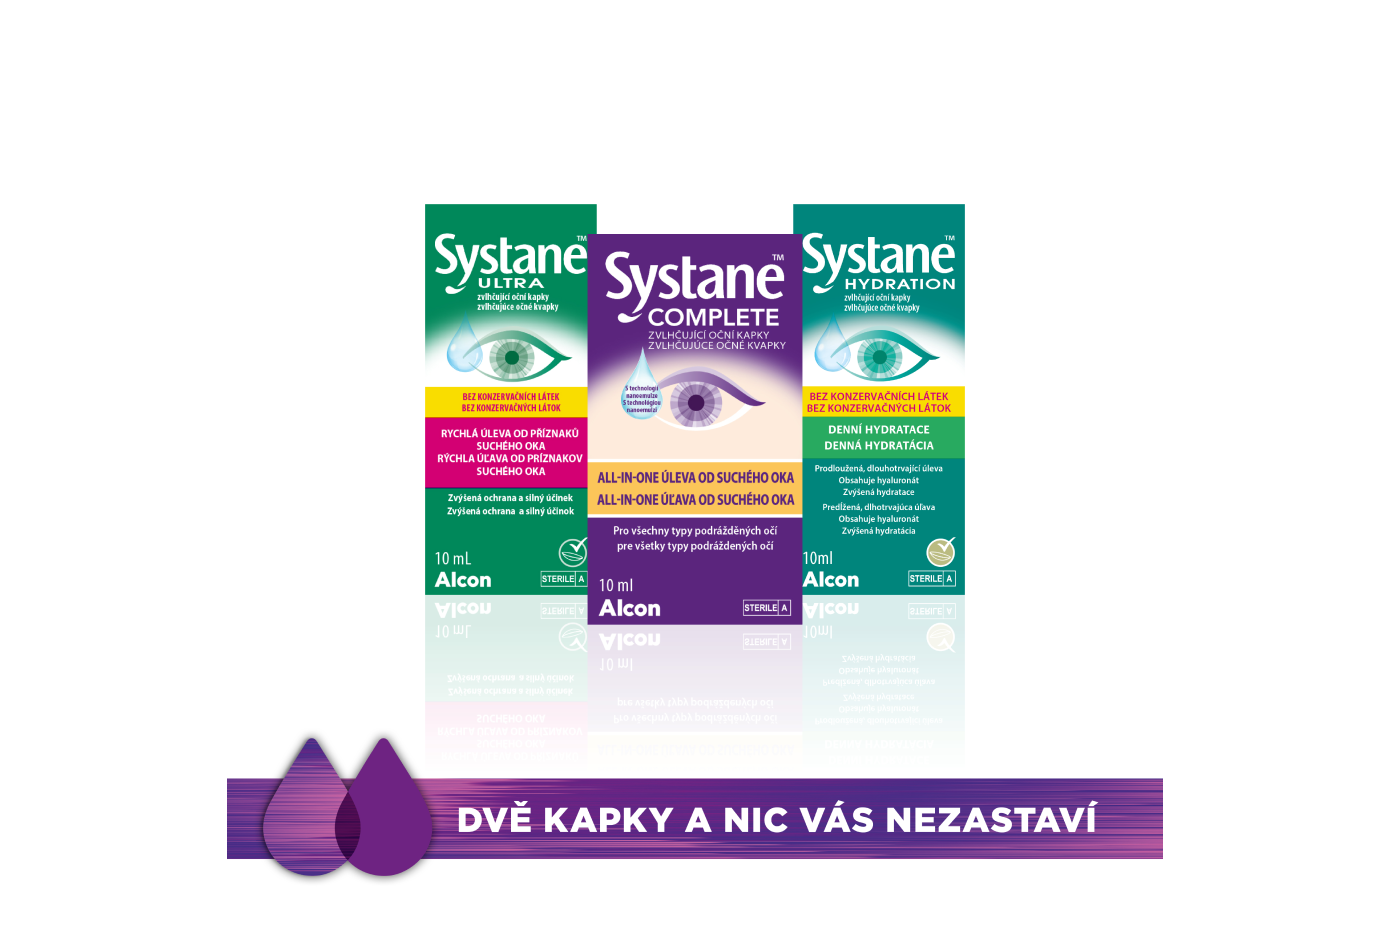 Systane preservative free products